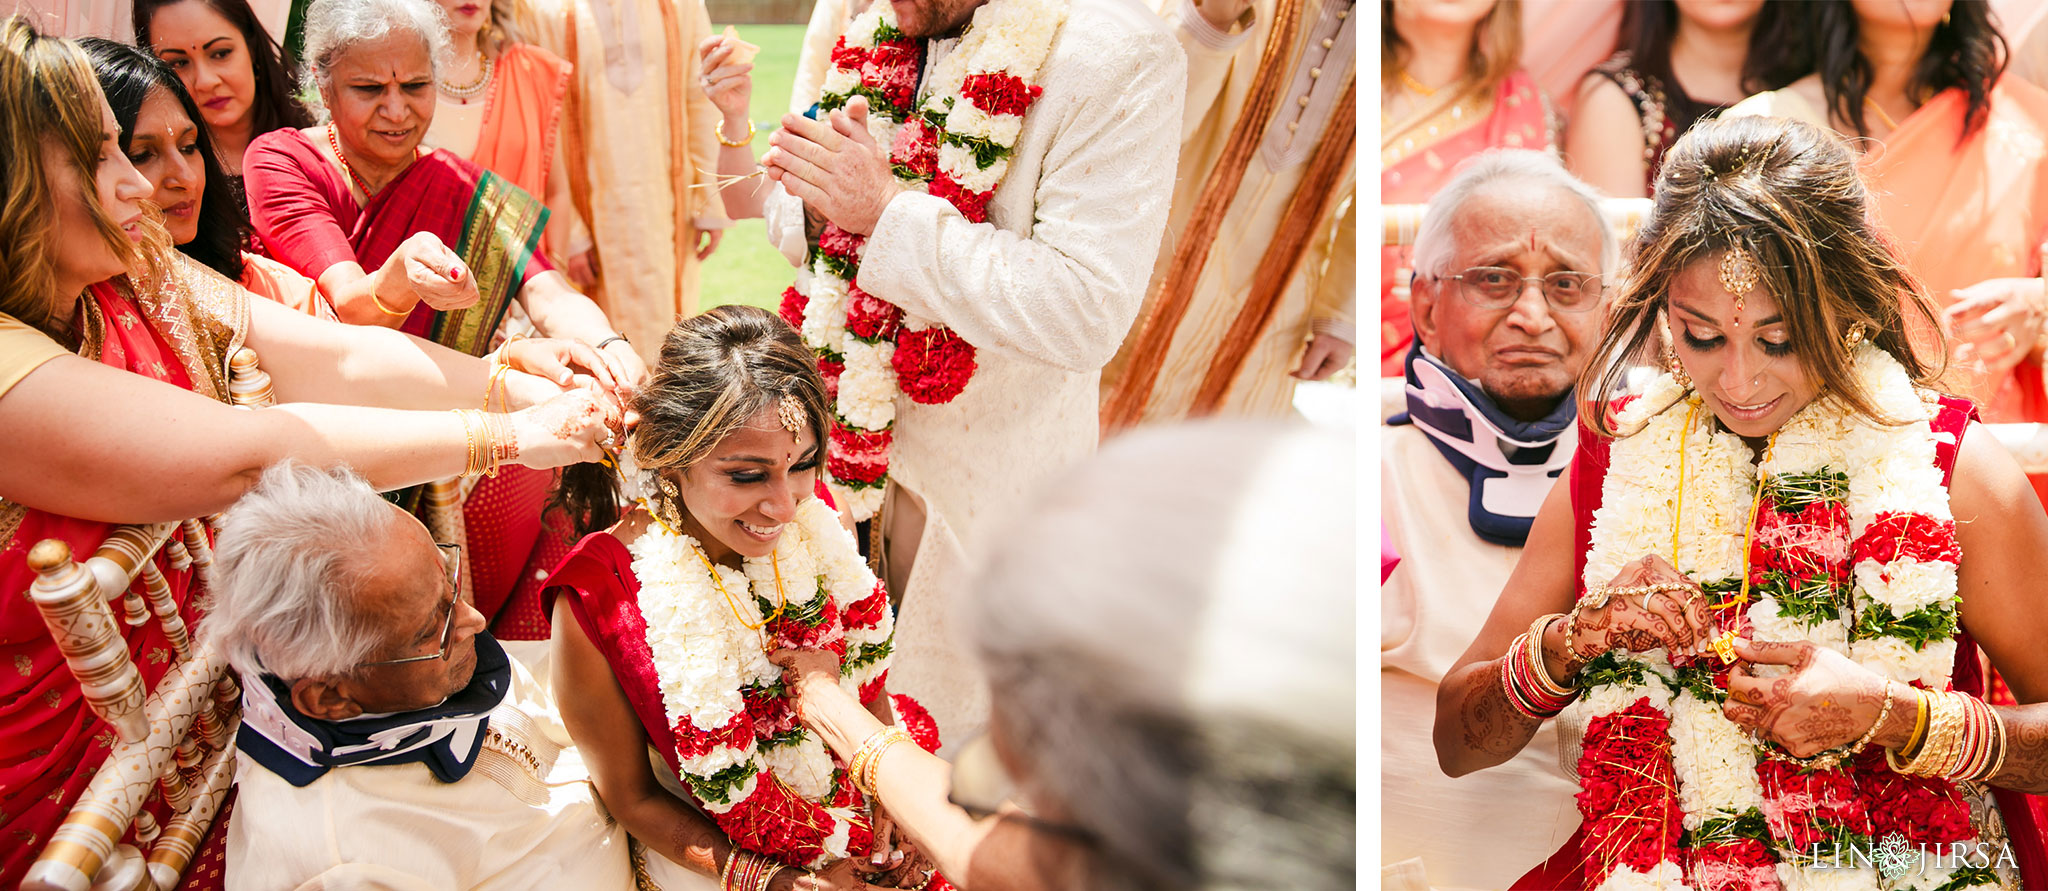 035 sherwood country club indian wedding ceremony photography